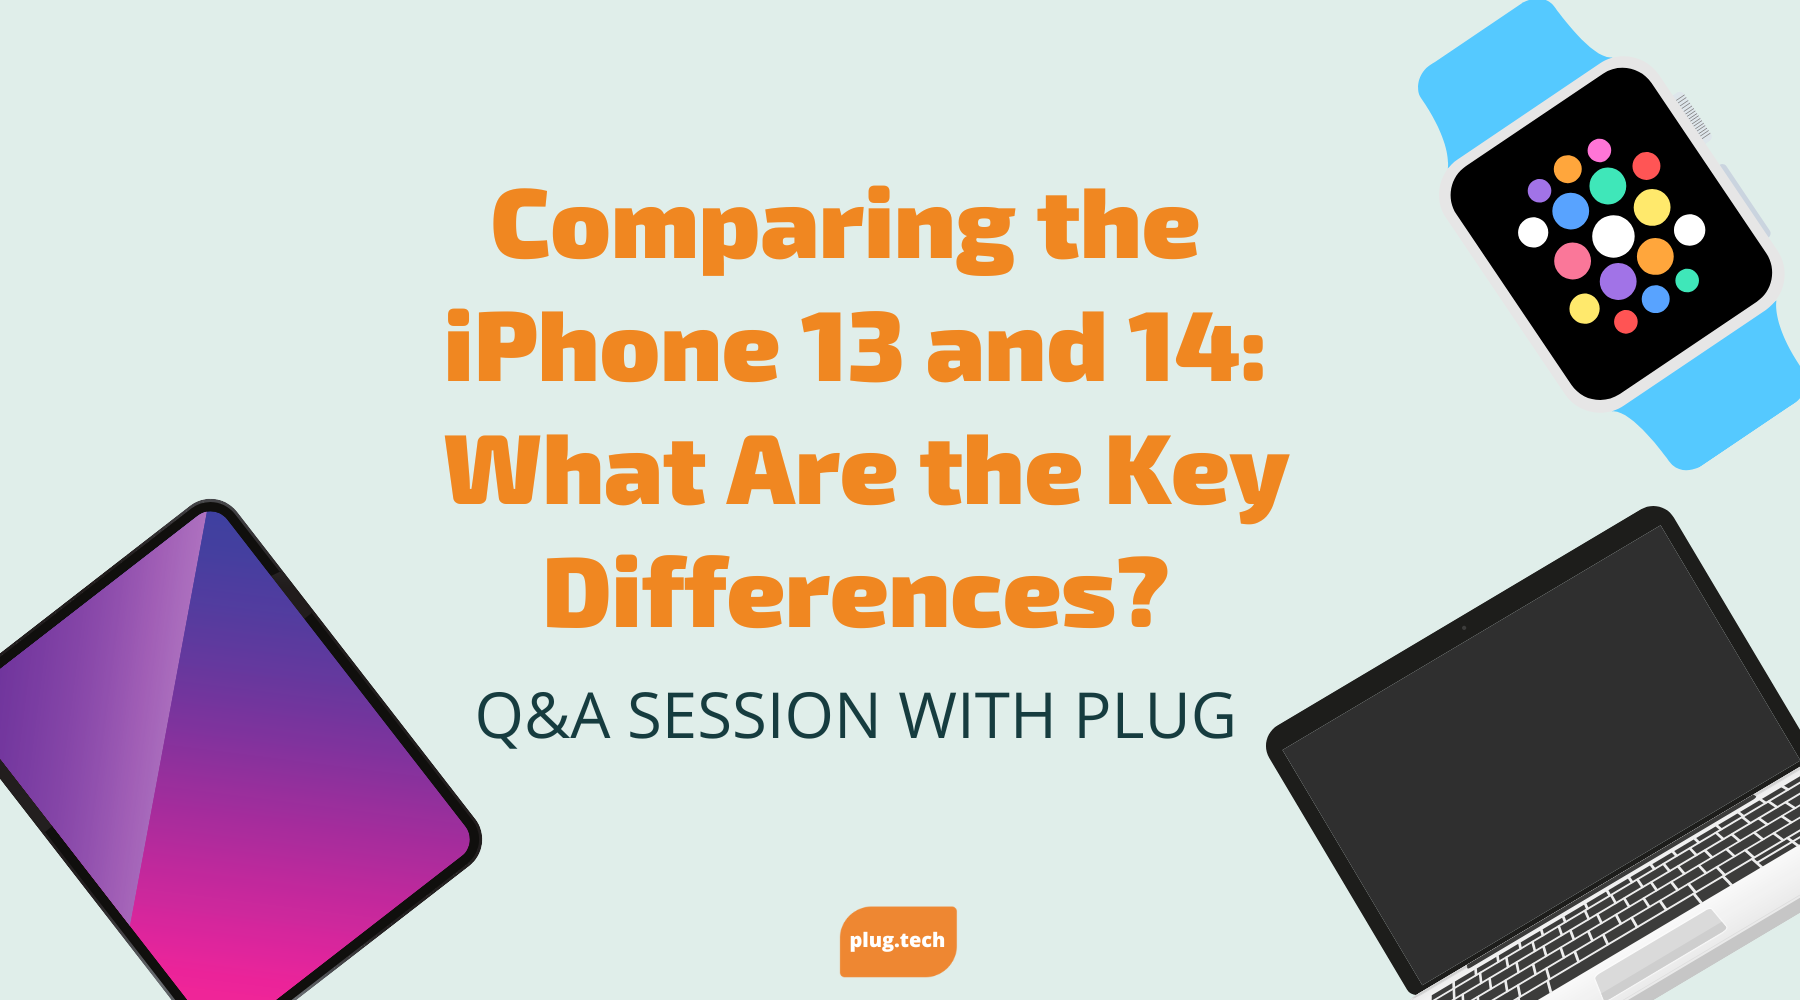 Comparing the iPhone 13 and 14: What Are the Key Differences?